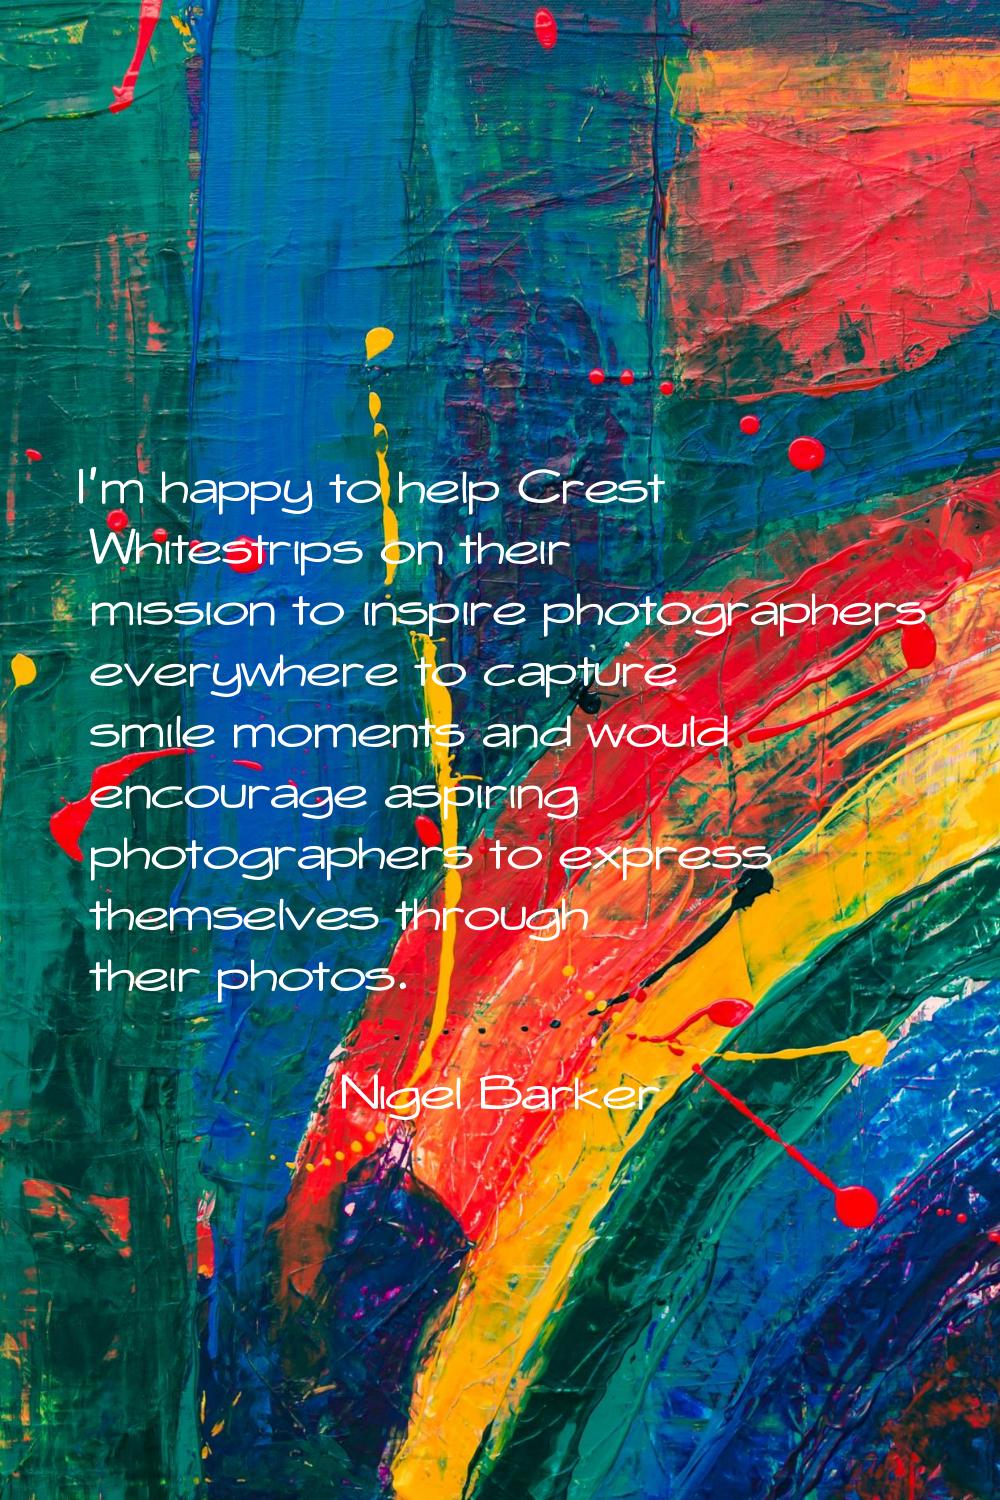 I'm happy to help Crest Whitestrips on their mission to inspire photographers everywhere to capture